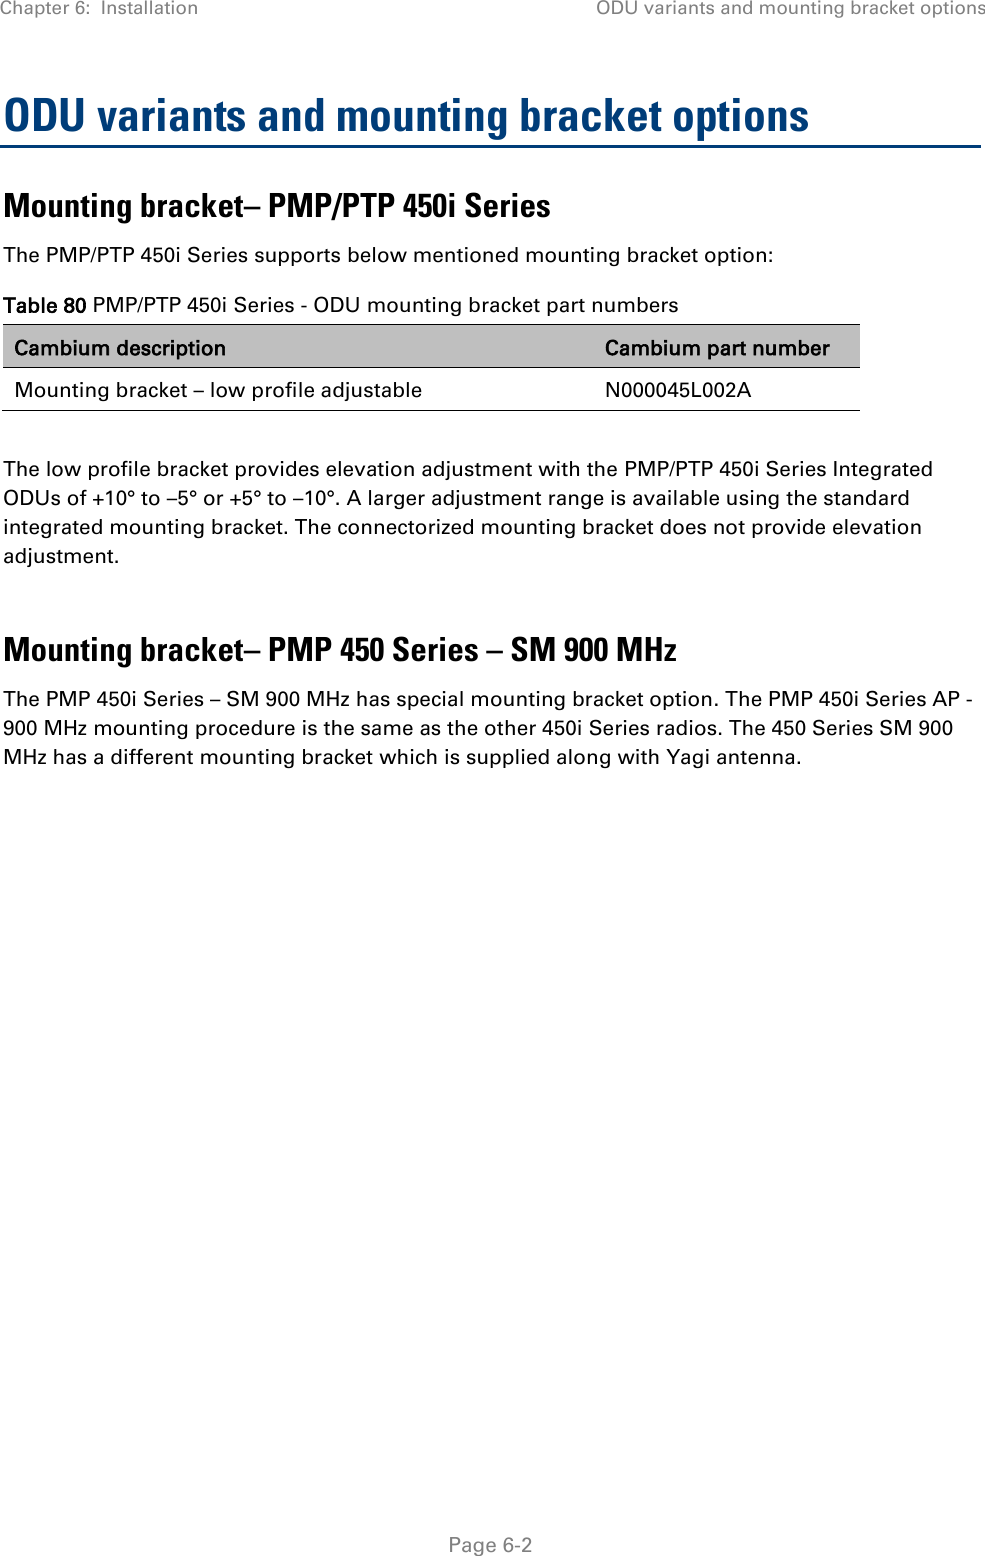 Chapter 6:  Installation ODU variants and mounting bracket options   Page 6-2 ODU variants and mounting bracket options Mounting bracket– PMP/PTP 450i Series  The PMP/PTP 450i Series supports below mentioned mounting bracket option: Table 80 PMP/PTP 450i Series - ODU mounting bracket part numbers Cambium description Cambium part number Mounting bracket – low profile adjustable N000045L002A  The low profile bracket provides elevation adjustment with the PMP/PTP 450i Series Integrated ODUs of +10° to –5° or +5° to –10°. A larger adjustment range is available using the standard integrated mounting bracket. The connectorized mounting bracket does not provide elevation adjustment.  Mounting bracket– PMP 450 Series – SM 900 MHz The PMP 450i Series – SM 900 MHz has special mounting bracket option. The PMP 450i Series AP - 900 MHz mounting procedure is the same as the other 450i Series radios. The 450 Series SM 900 MHz has a different mounting bracket which is supplied along with Yagi antenna.  